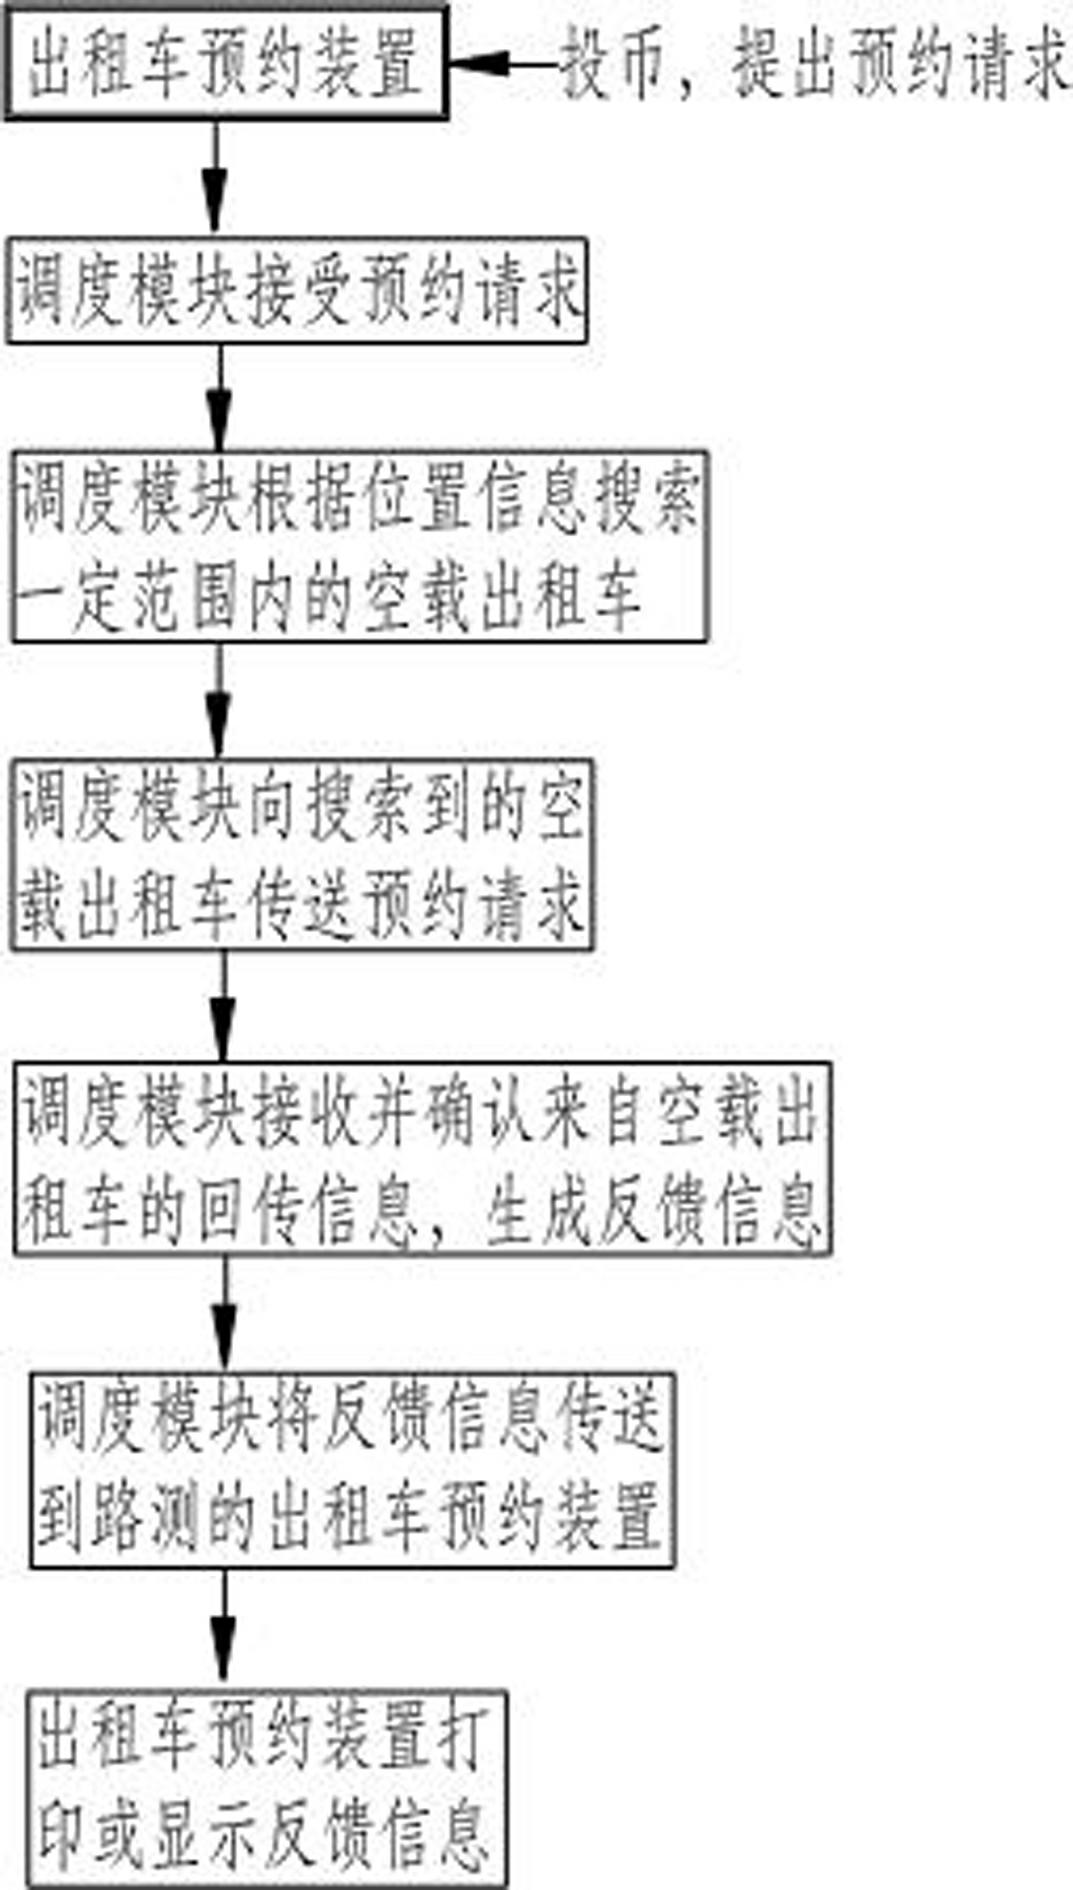 Self-service taxi instant reservation system and self-service taxi instant reservation method